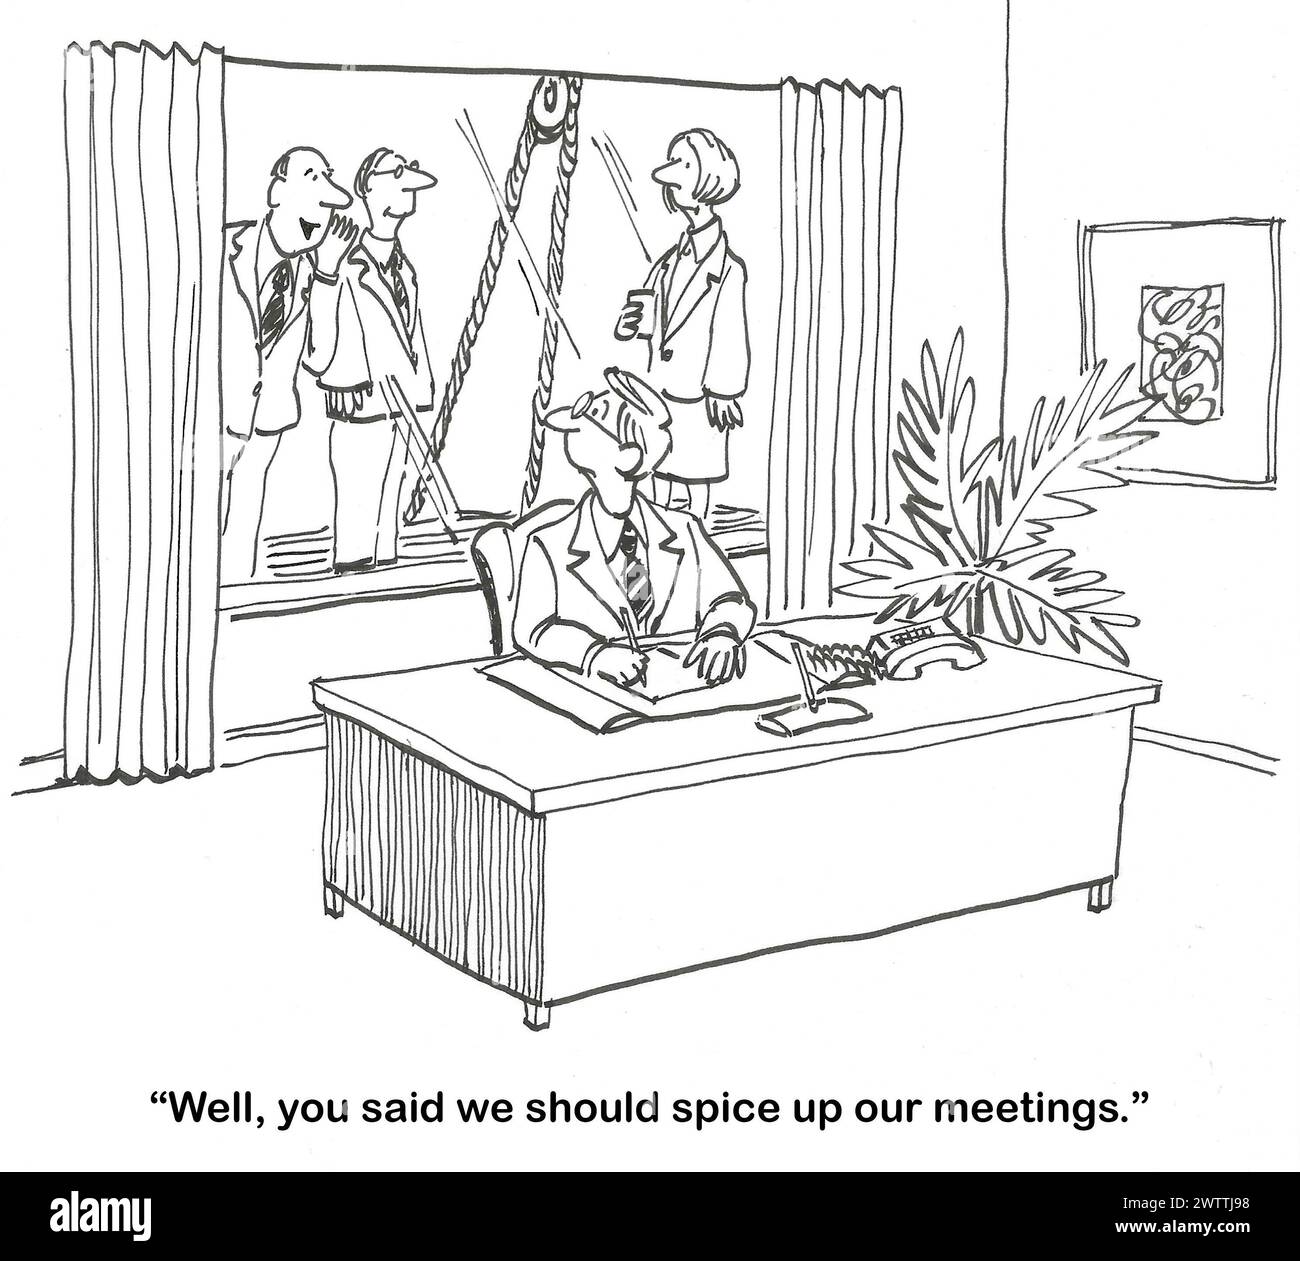 BW cartoon of a man in his work office.  His subordinates are outside his window, he told them they need to spice up their meetings. Stock Photo